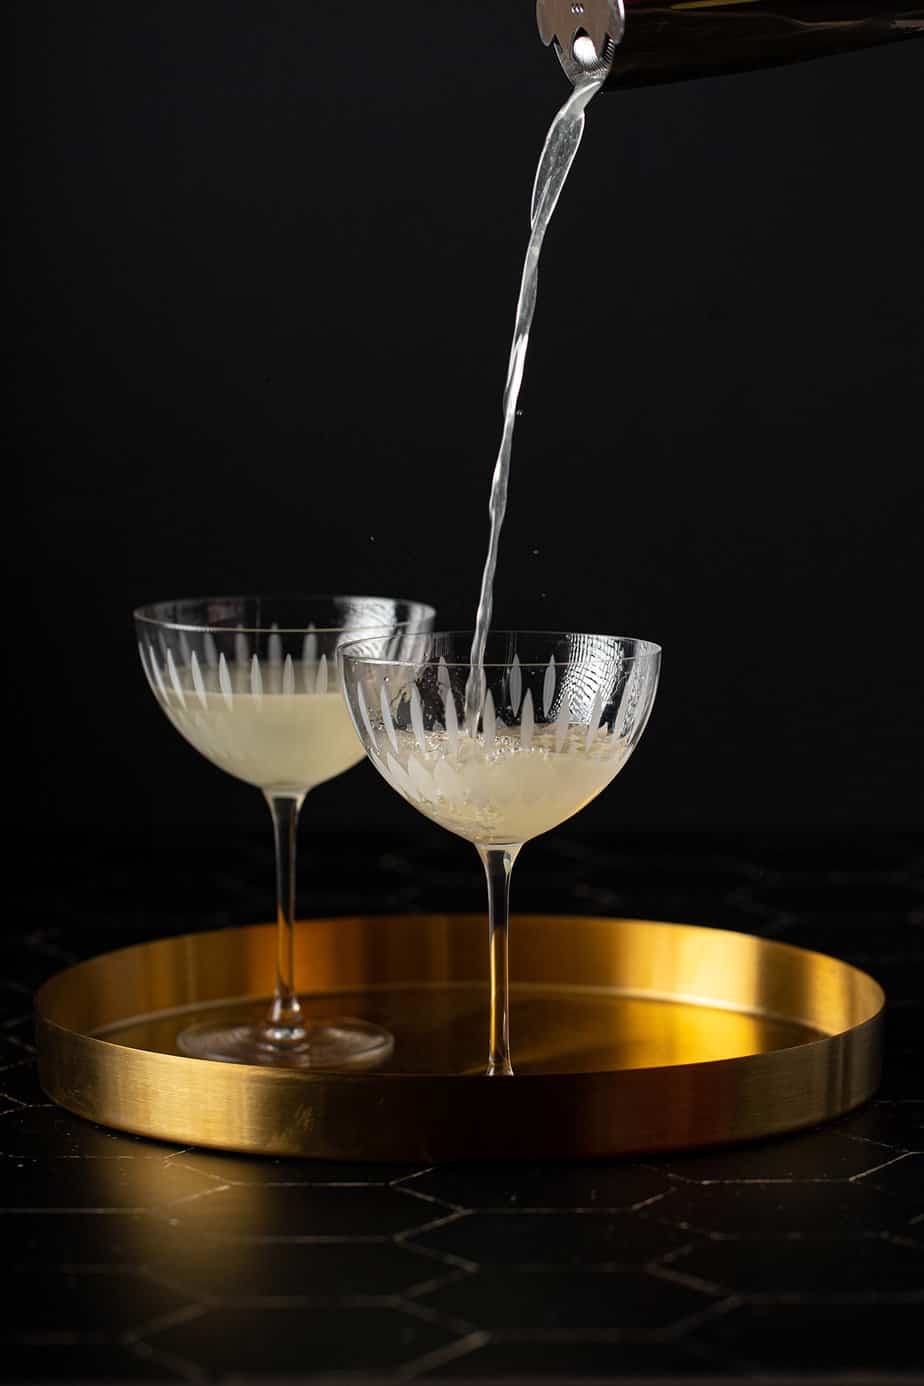 french gimlet being poured into a coupe glass